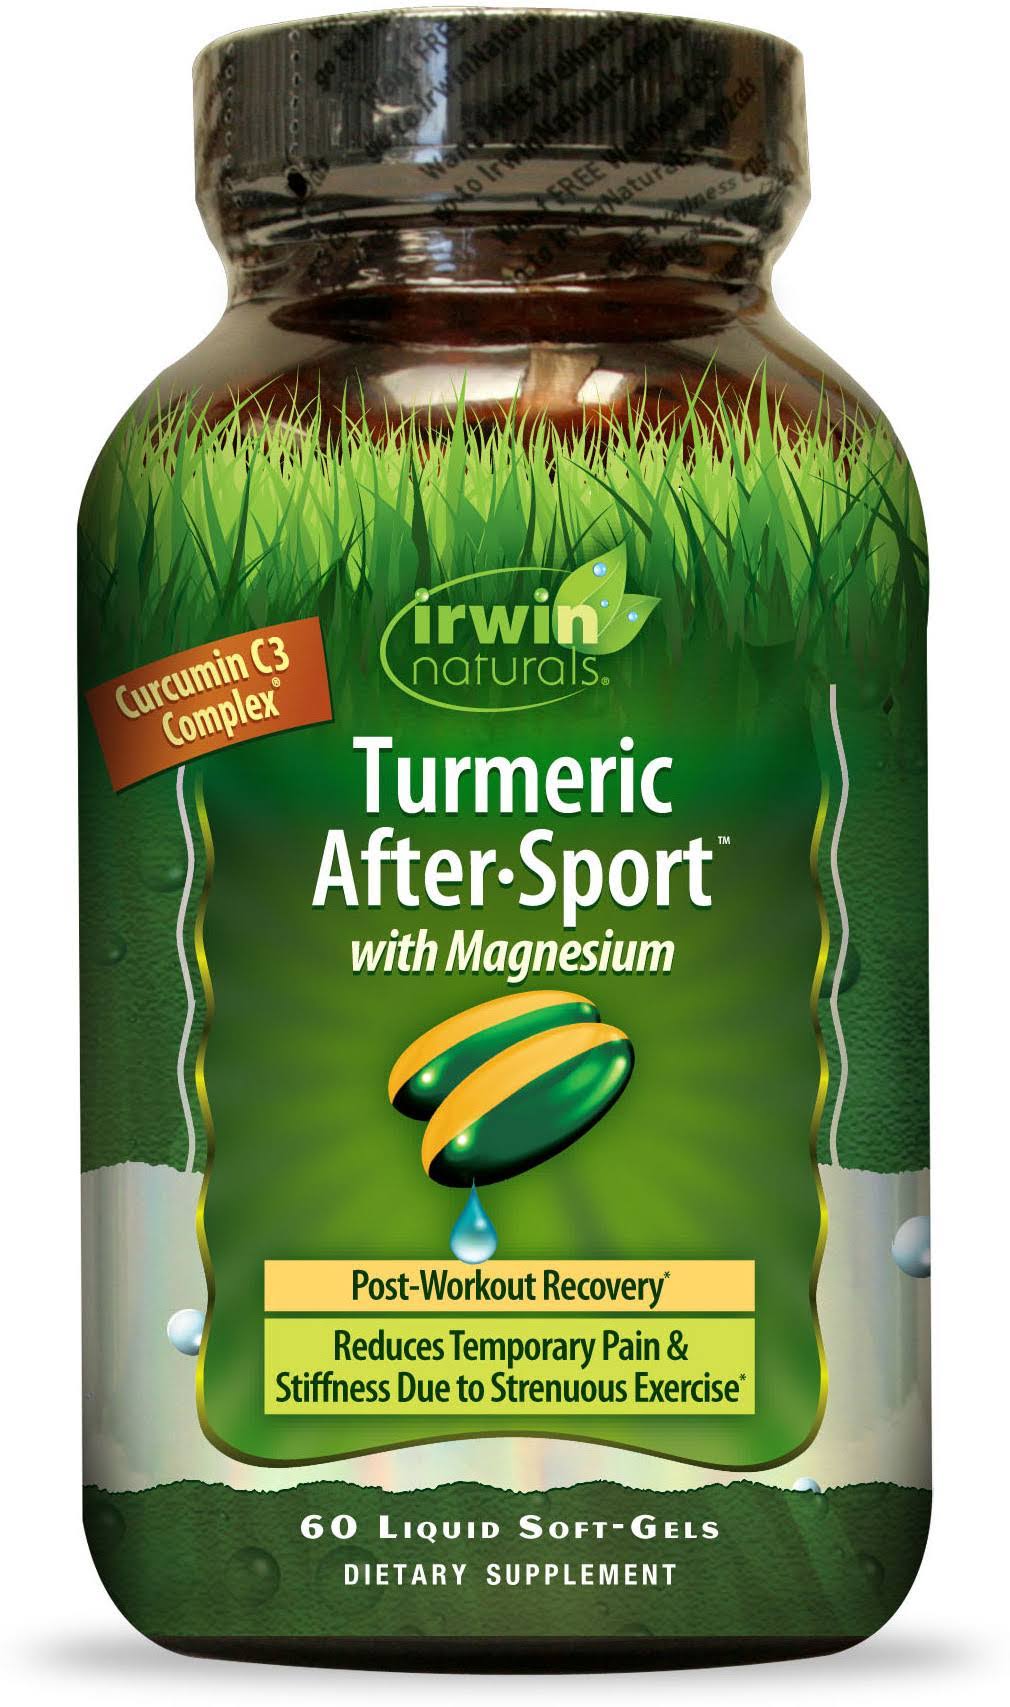 Irwin Naturals Turmeric After Sports With Magnesium Supplement - 60 Liquid Softgels